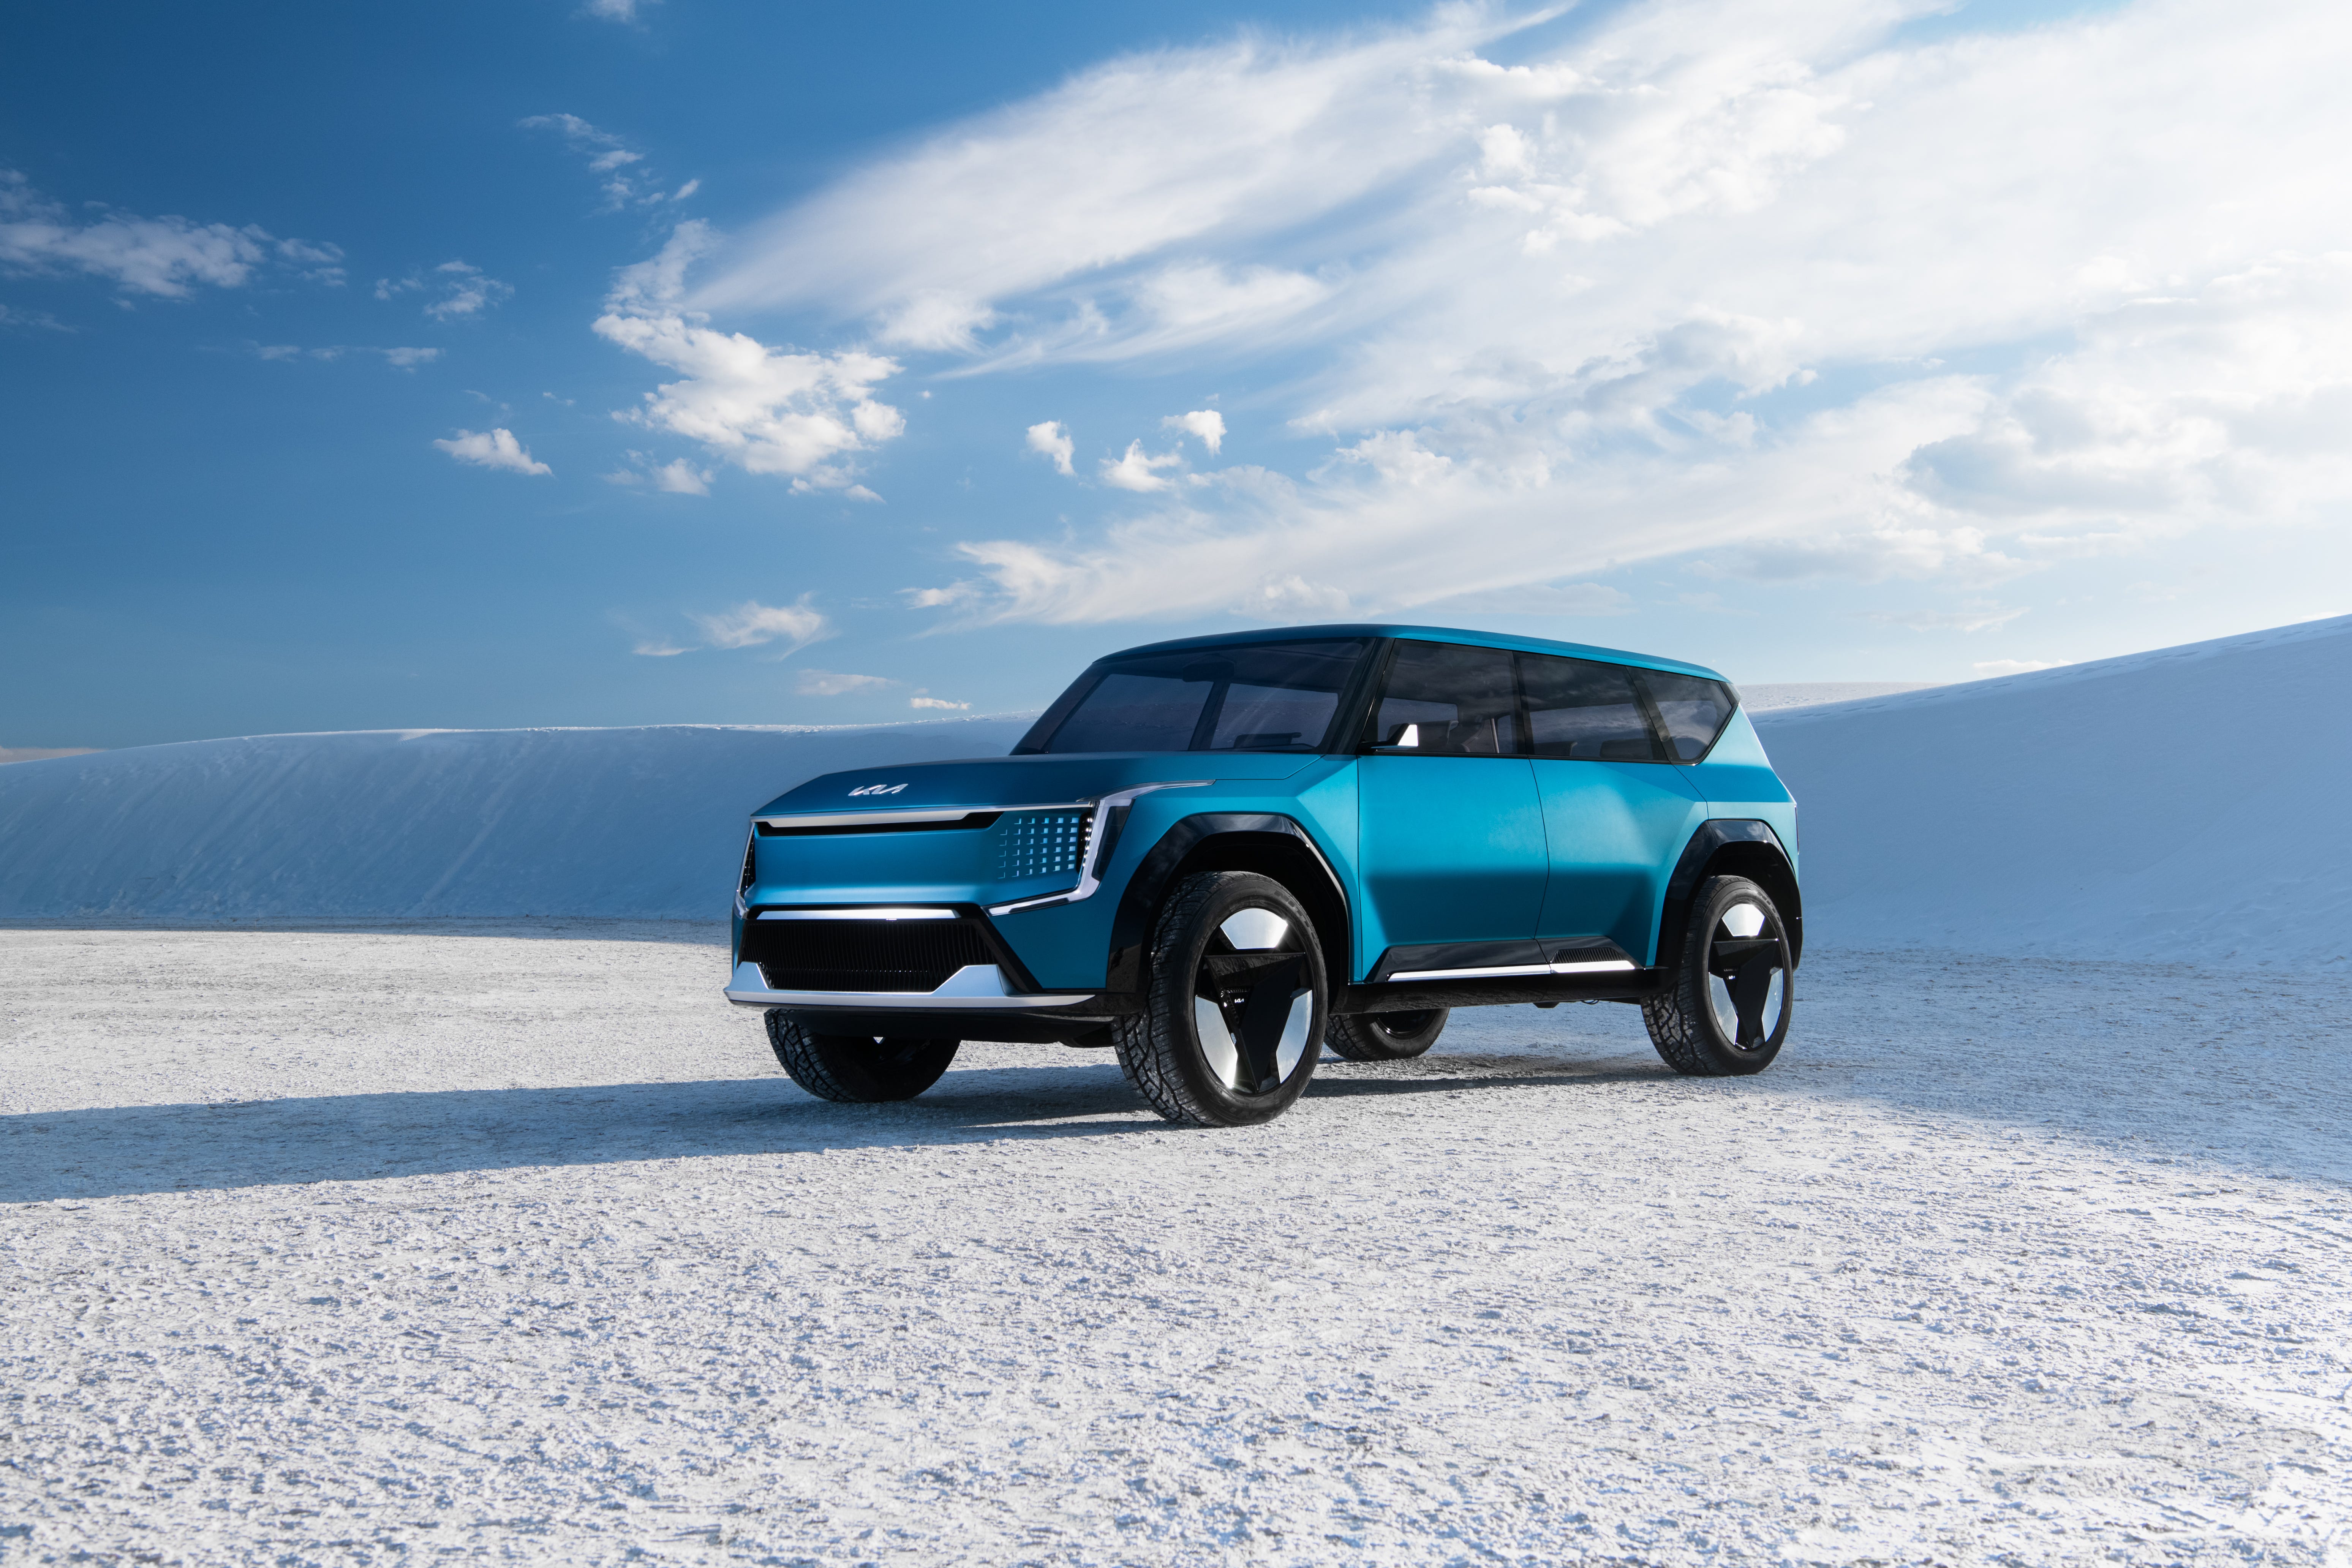 2023 Electric Cars: 7 Incredible New EVs Launching Soon - History